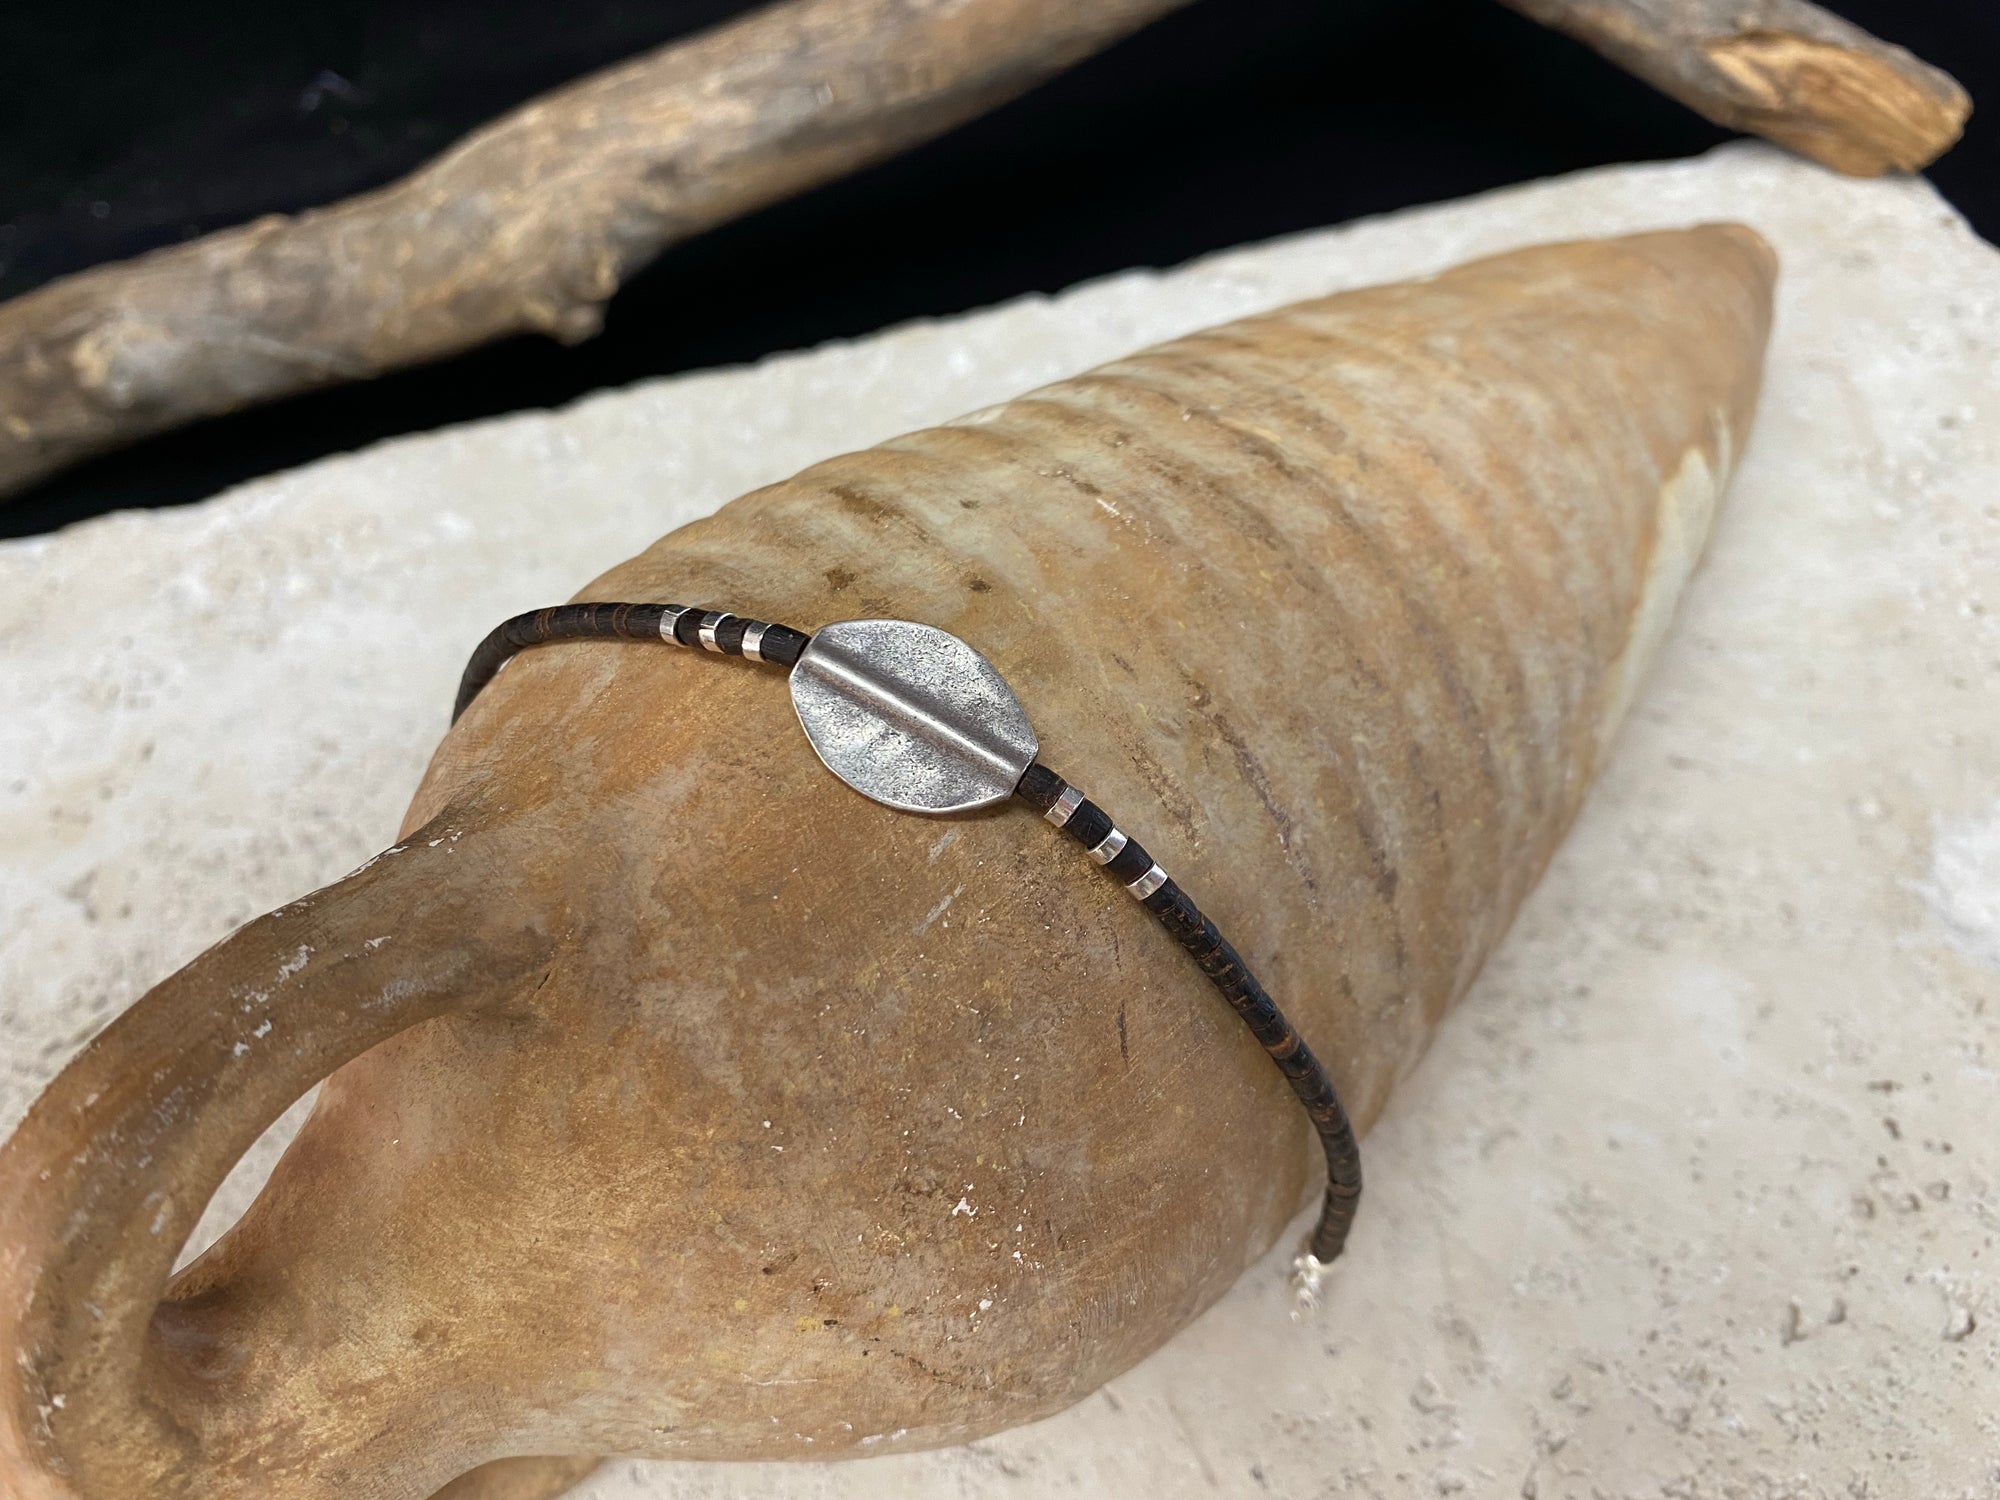 One of our signature coconut silver bracelets, crafted from polished coconut wood and hill tribe 95% silver., with sterling silver lobster clasp. A women's bracelet or a men's bracelet, it has a casual Boho vibe, and is made for that stacked bracelet look. Different sizes available